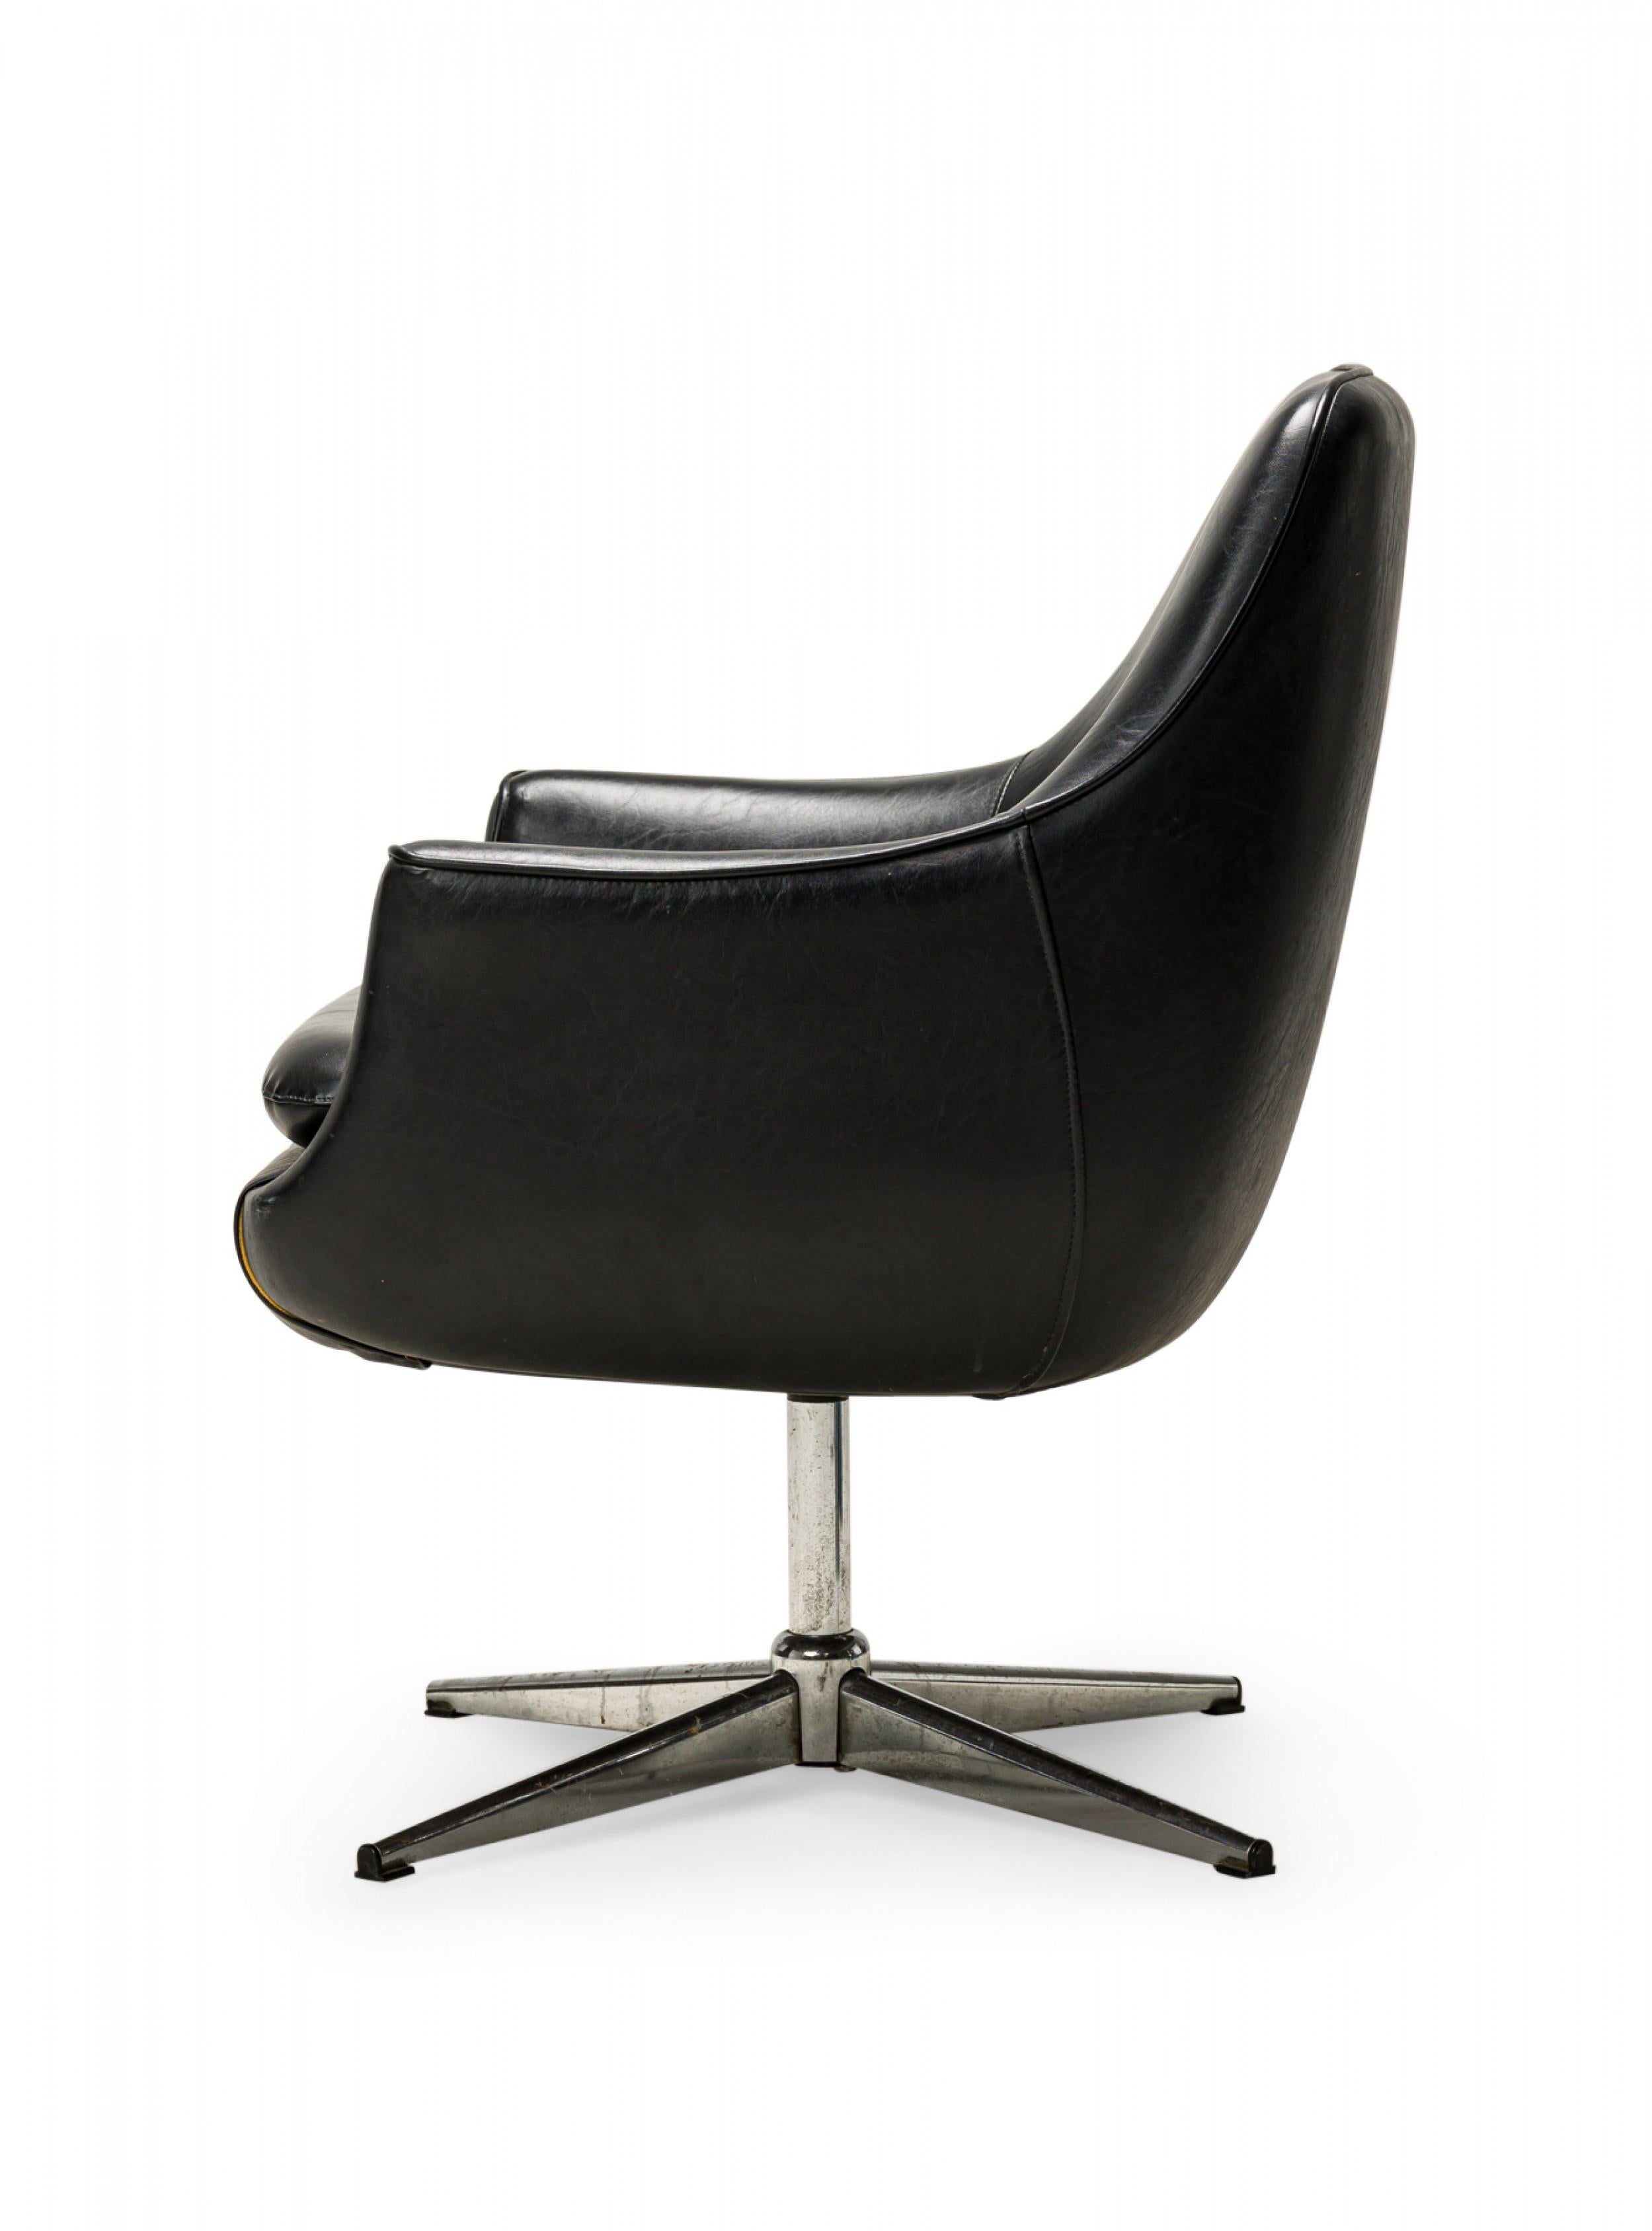 Mid-Century Modern Overman Swedish Black Leather and Chrome Swivel Armchair For Sale